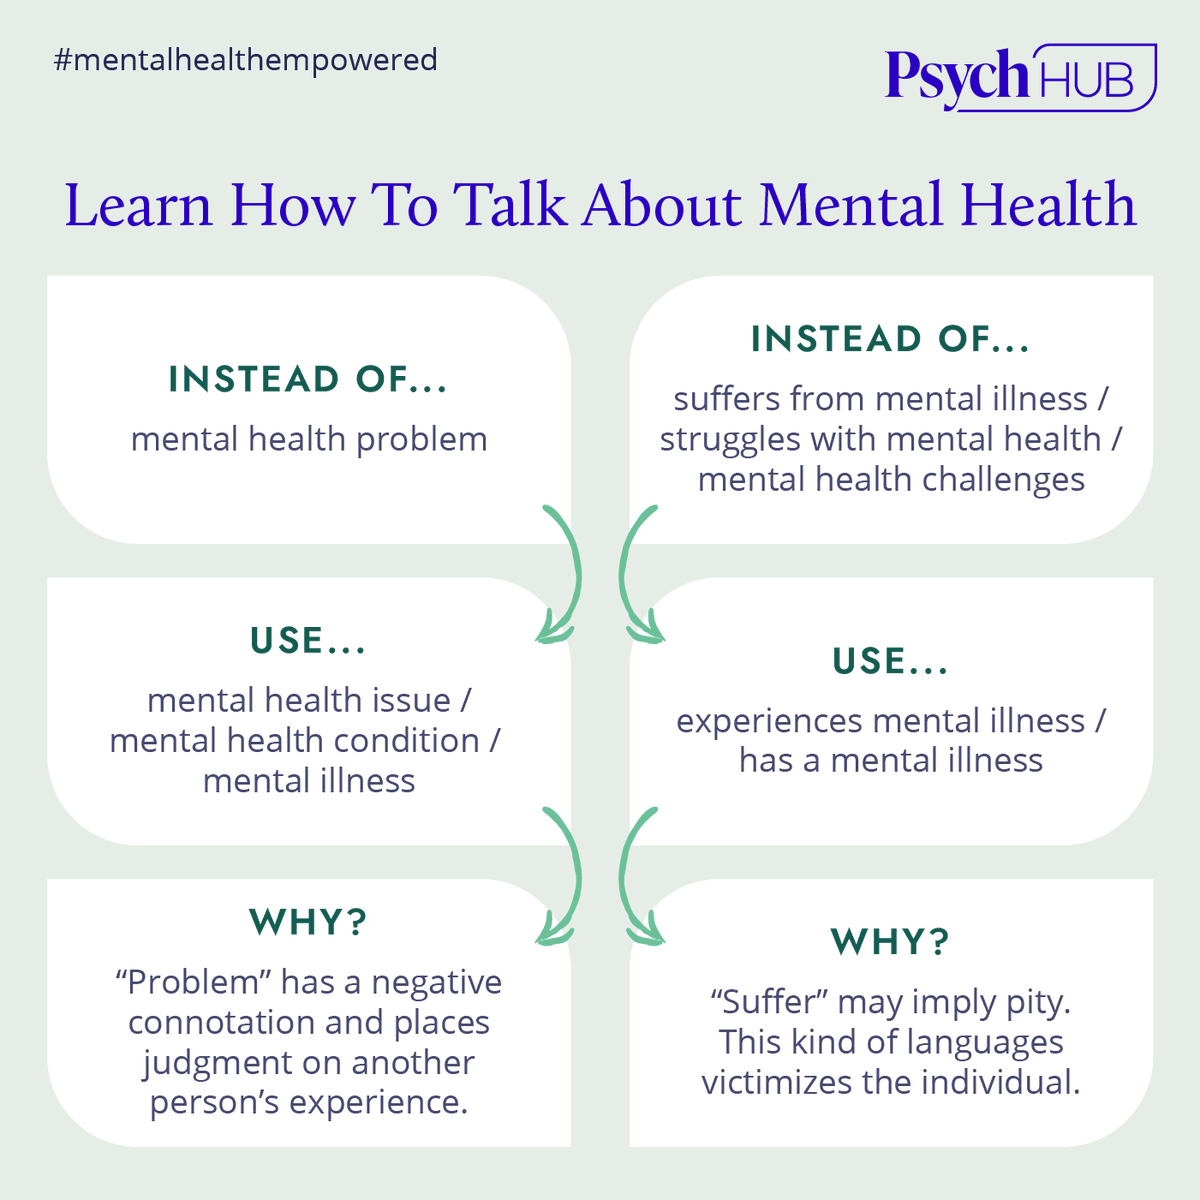 Stigma is one of the biggest barriers to people seeking support for mental health concerns, but the language we use can help foster inclusion and acceptance.

ABHW Corporate Partner, @PsychHub, shared some simple ways you can change how you talk about mental health.